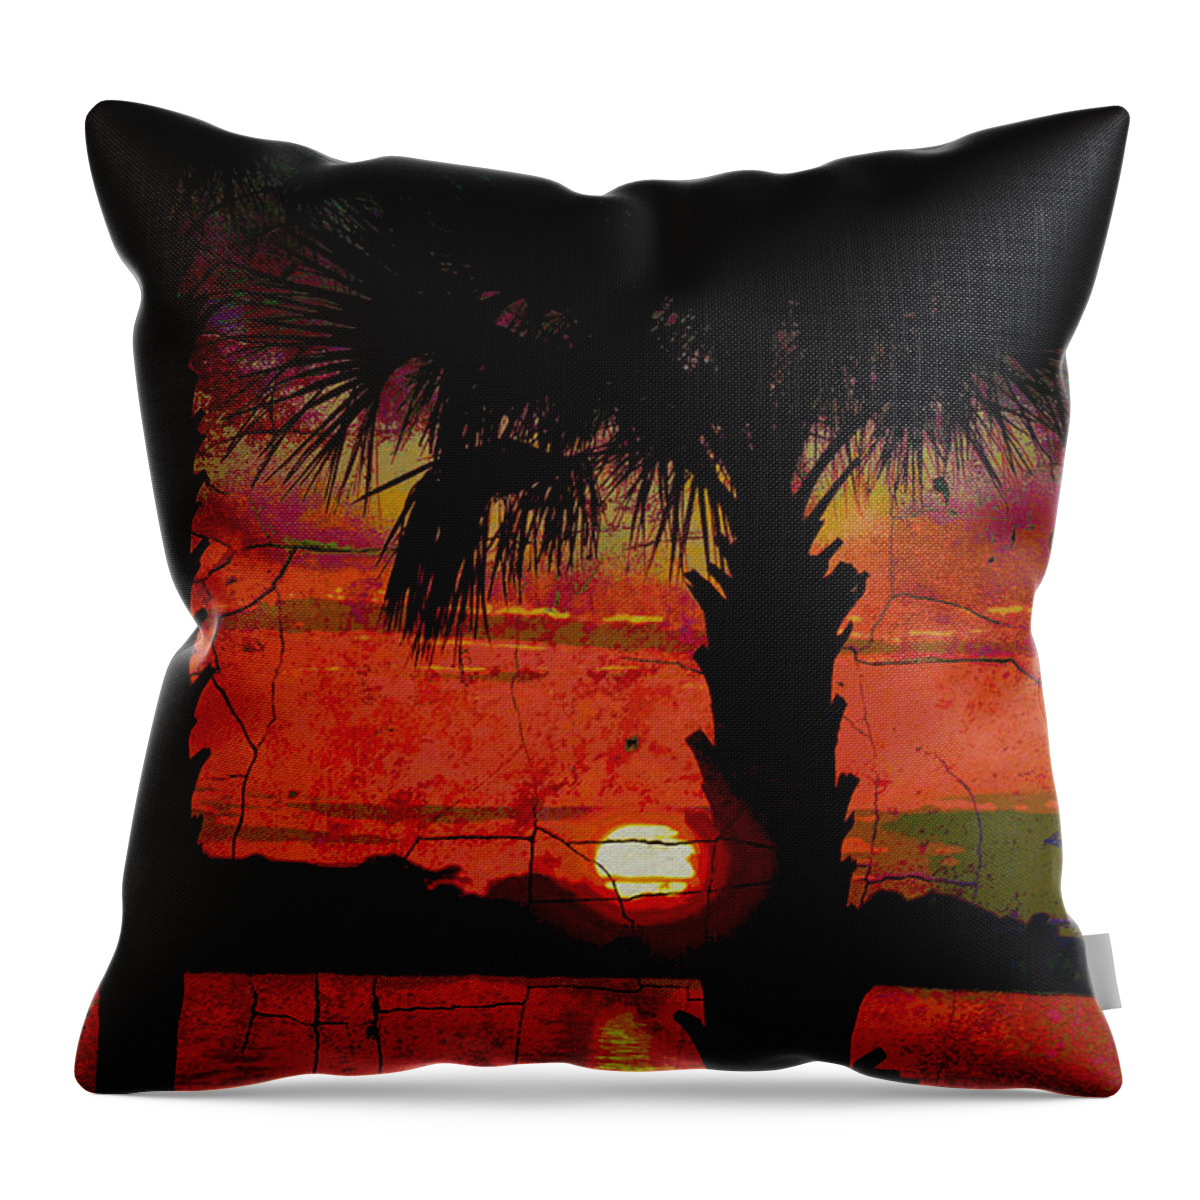 Seascapes Throw Pillow featuring the photograph When The Day Ends Time Is Exhausted by Jan Amiss Photography